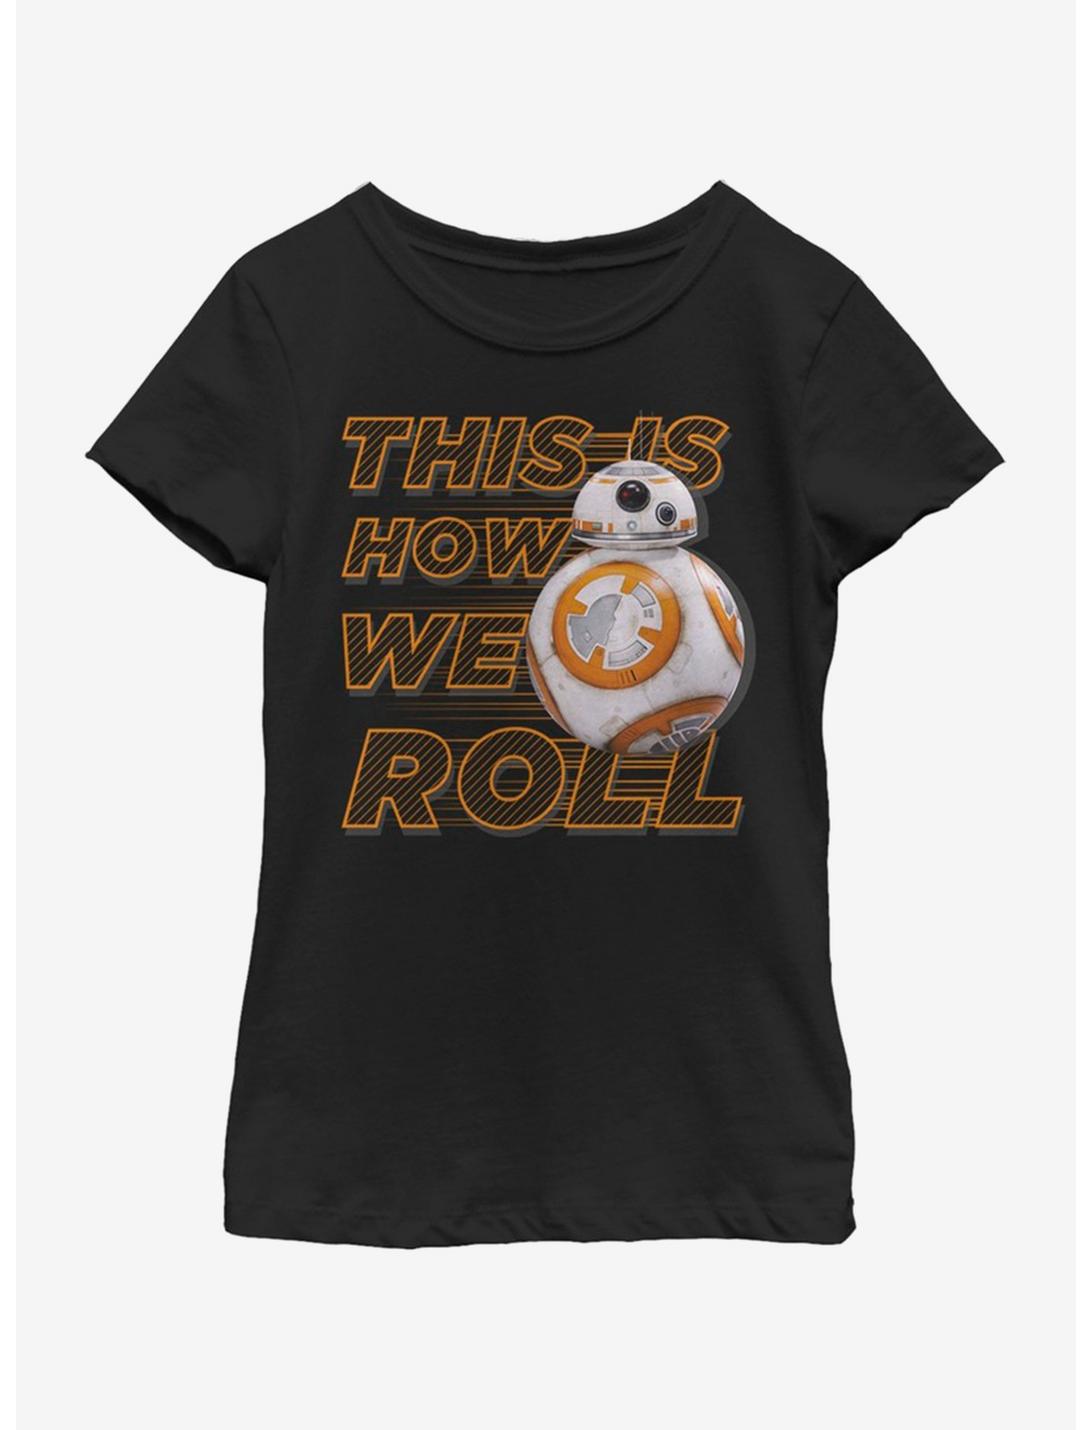 Star Wars The Force Awakens This Is How We Roll Front Youth Girls T-Shirt, BLACK, hi-res